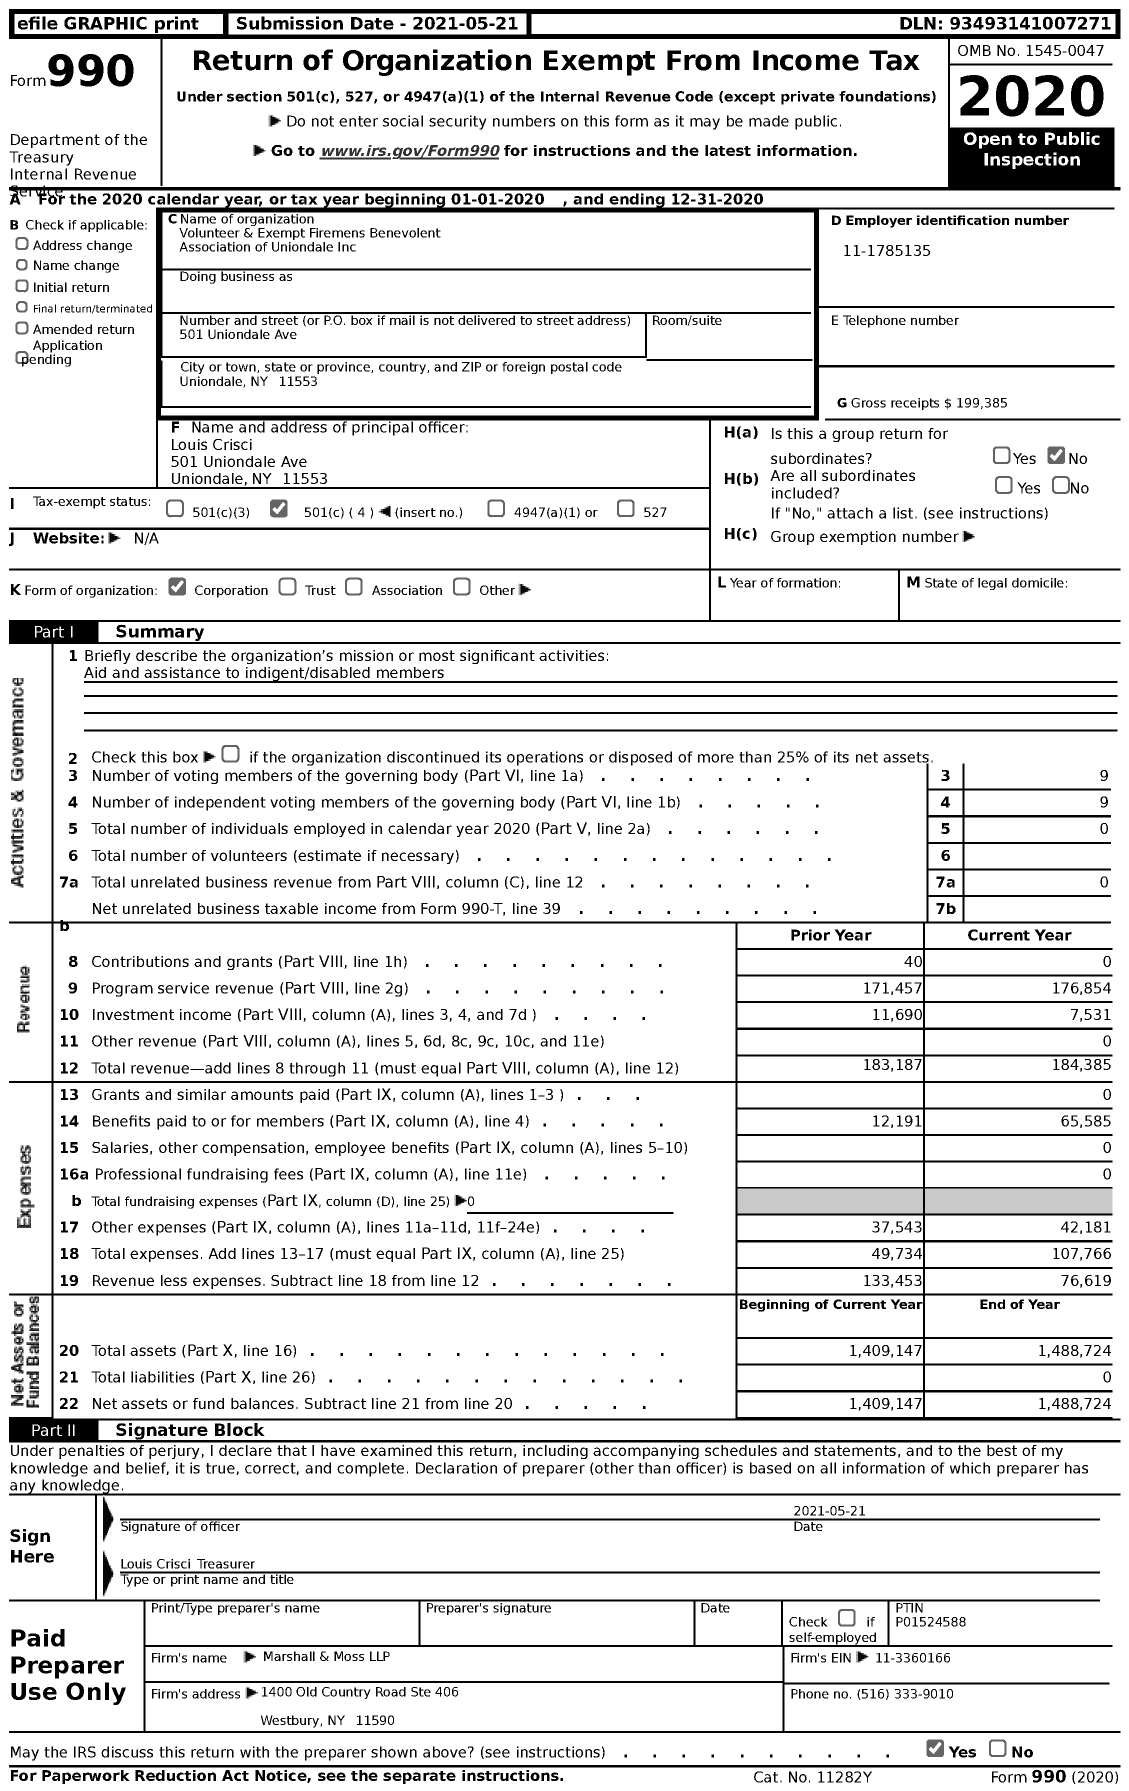 Image of first page of 2020 Form 990 for Volunteer and Exempt Firemens Benevolent Association of Uniondale